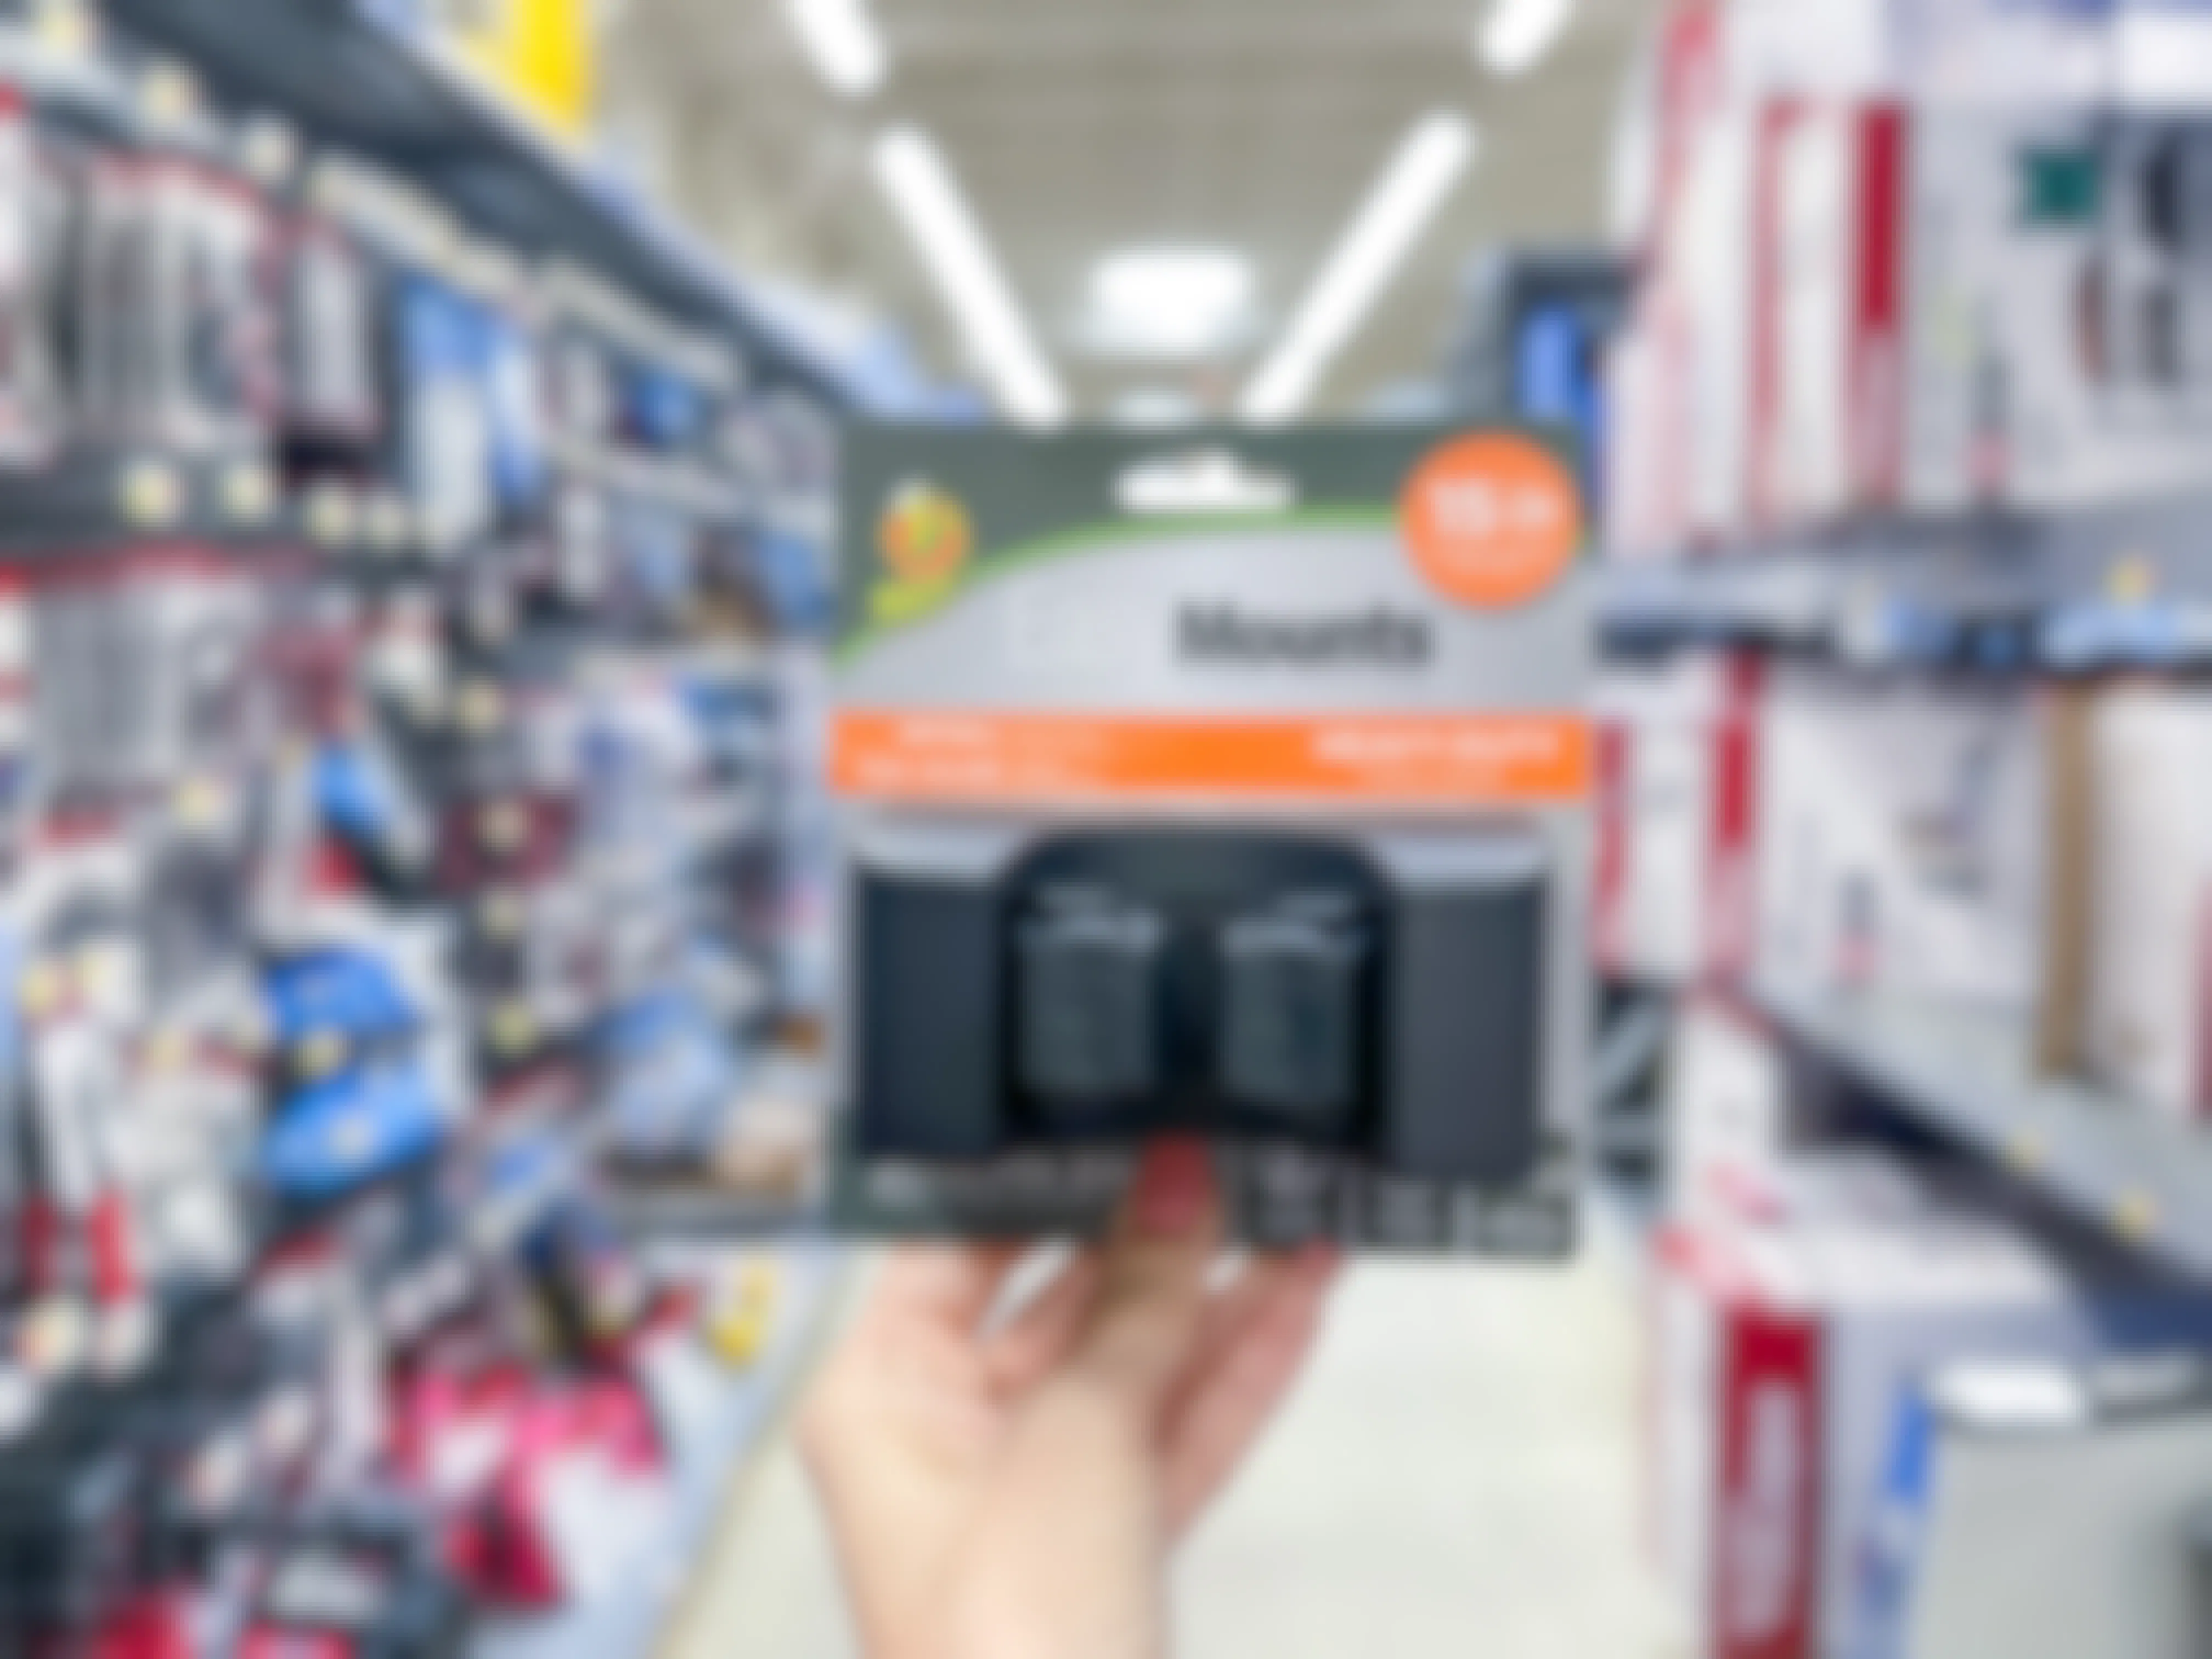 Save $5.50 on Duck EasyMounts With Ibotta at Walmart